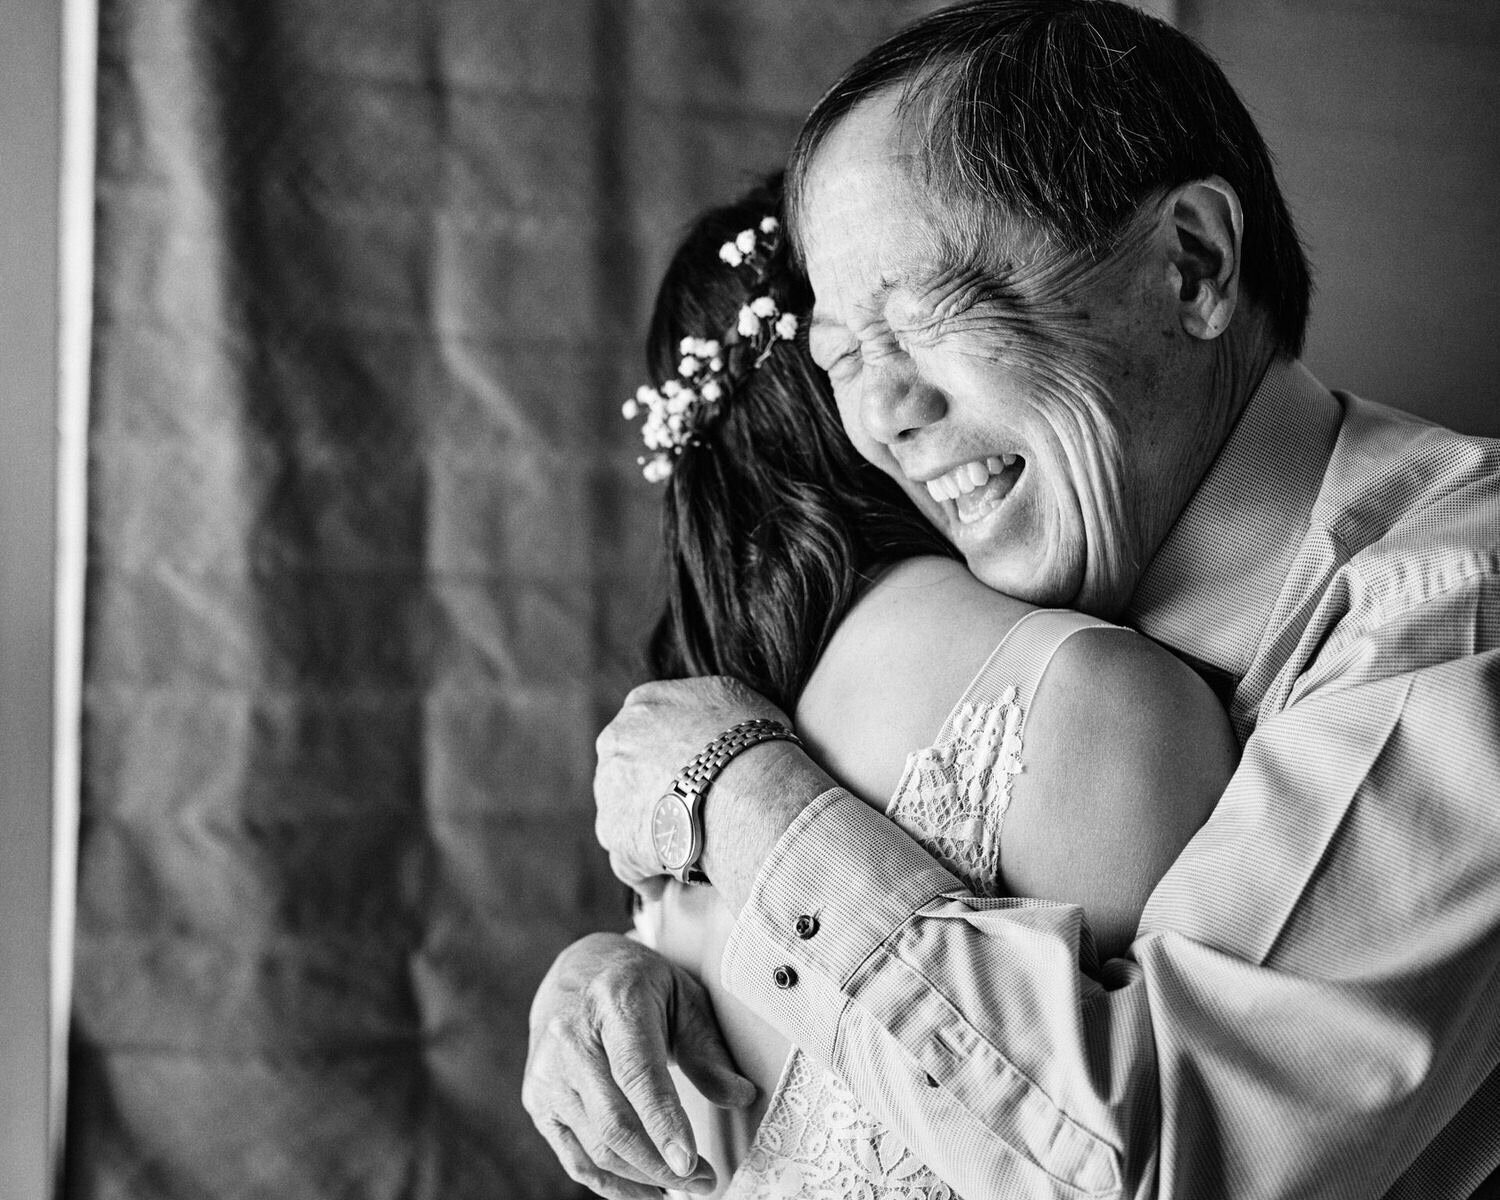 An emotional Father hugs the bride